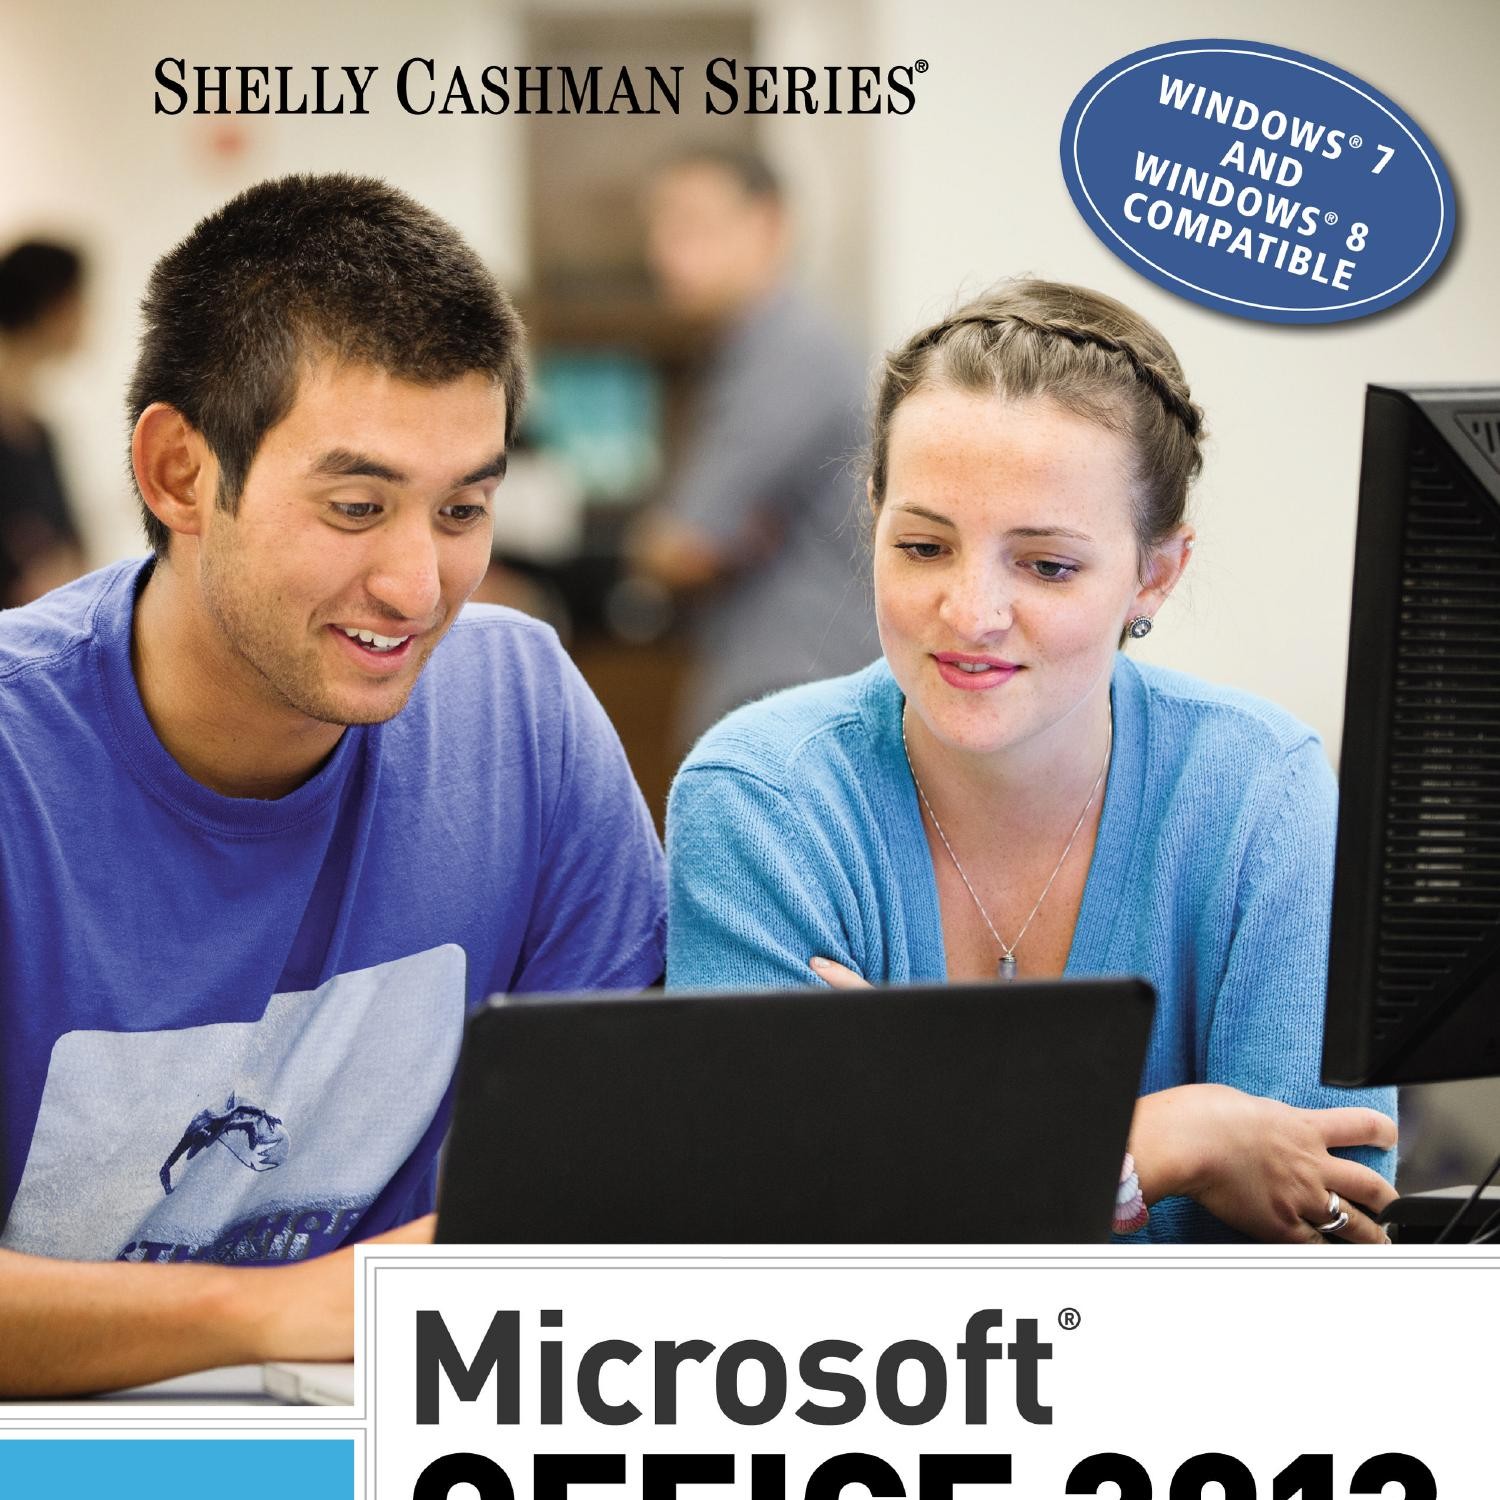 Microsoft Office 2013 introductory 2014 Misty E. Vermaat.pdf DocDroid